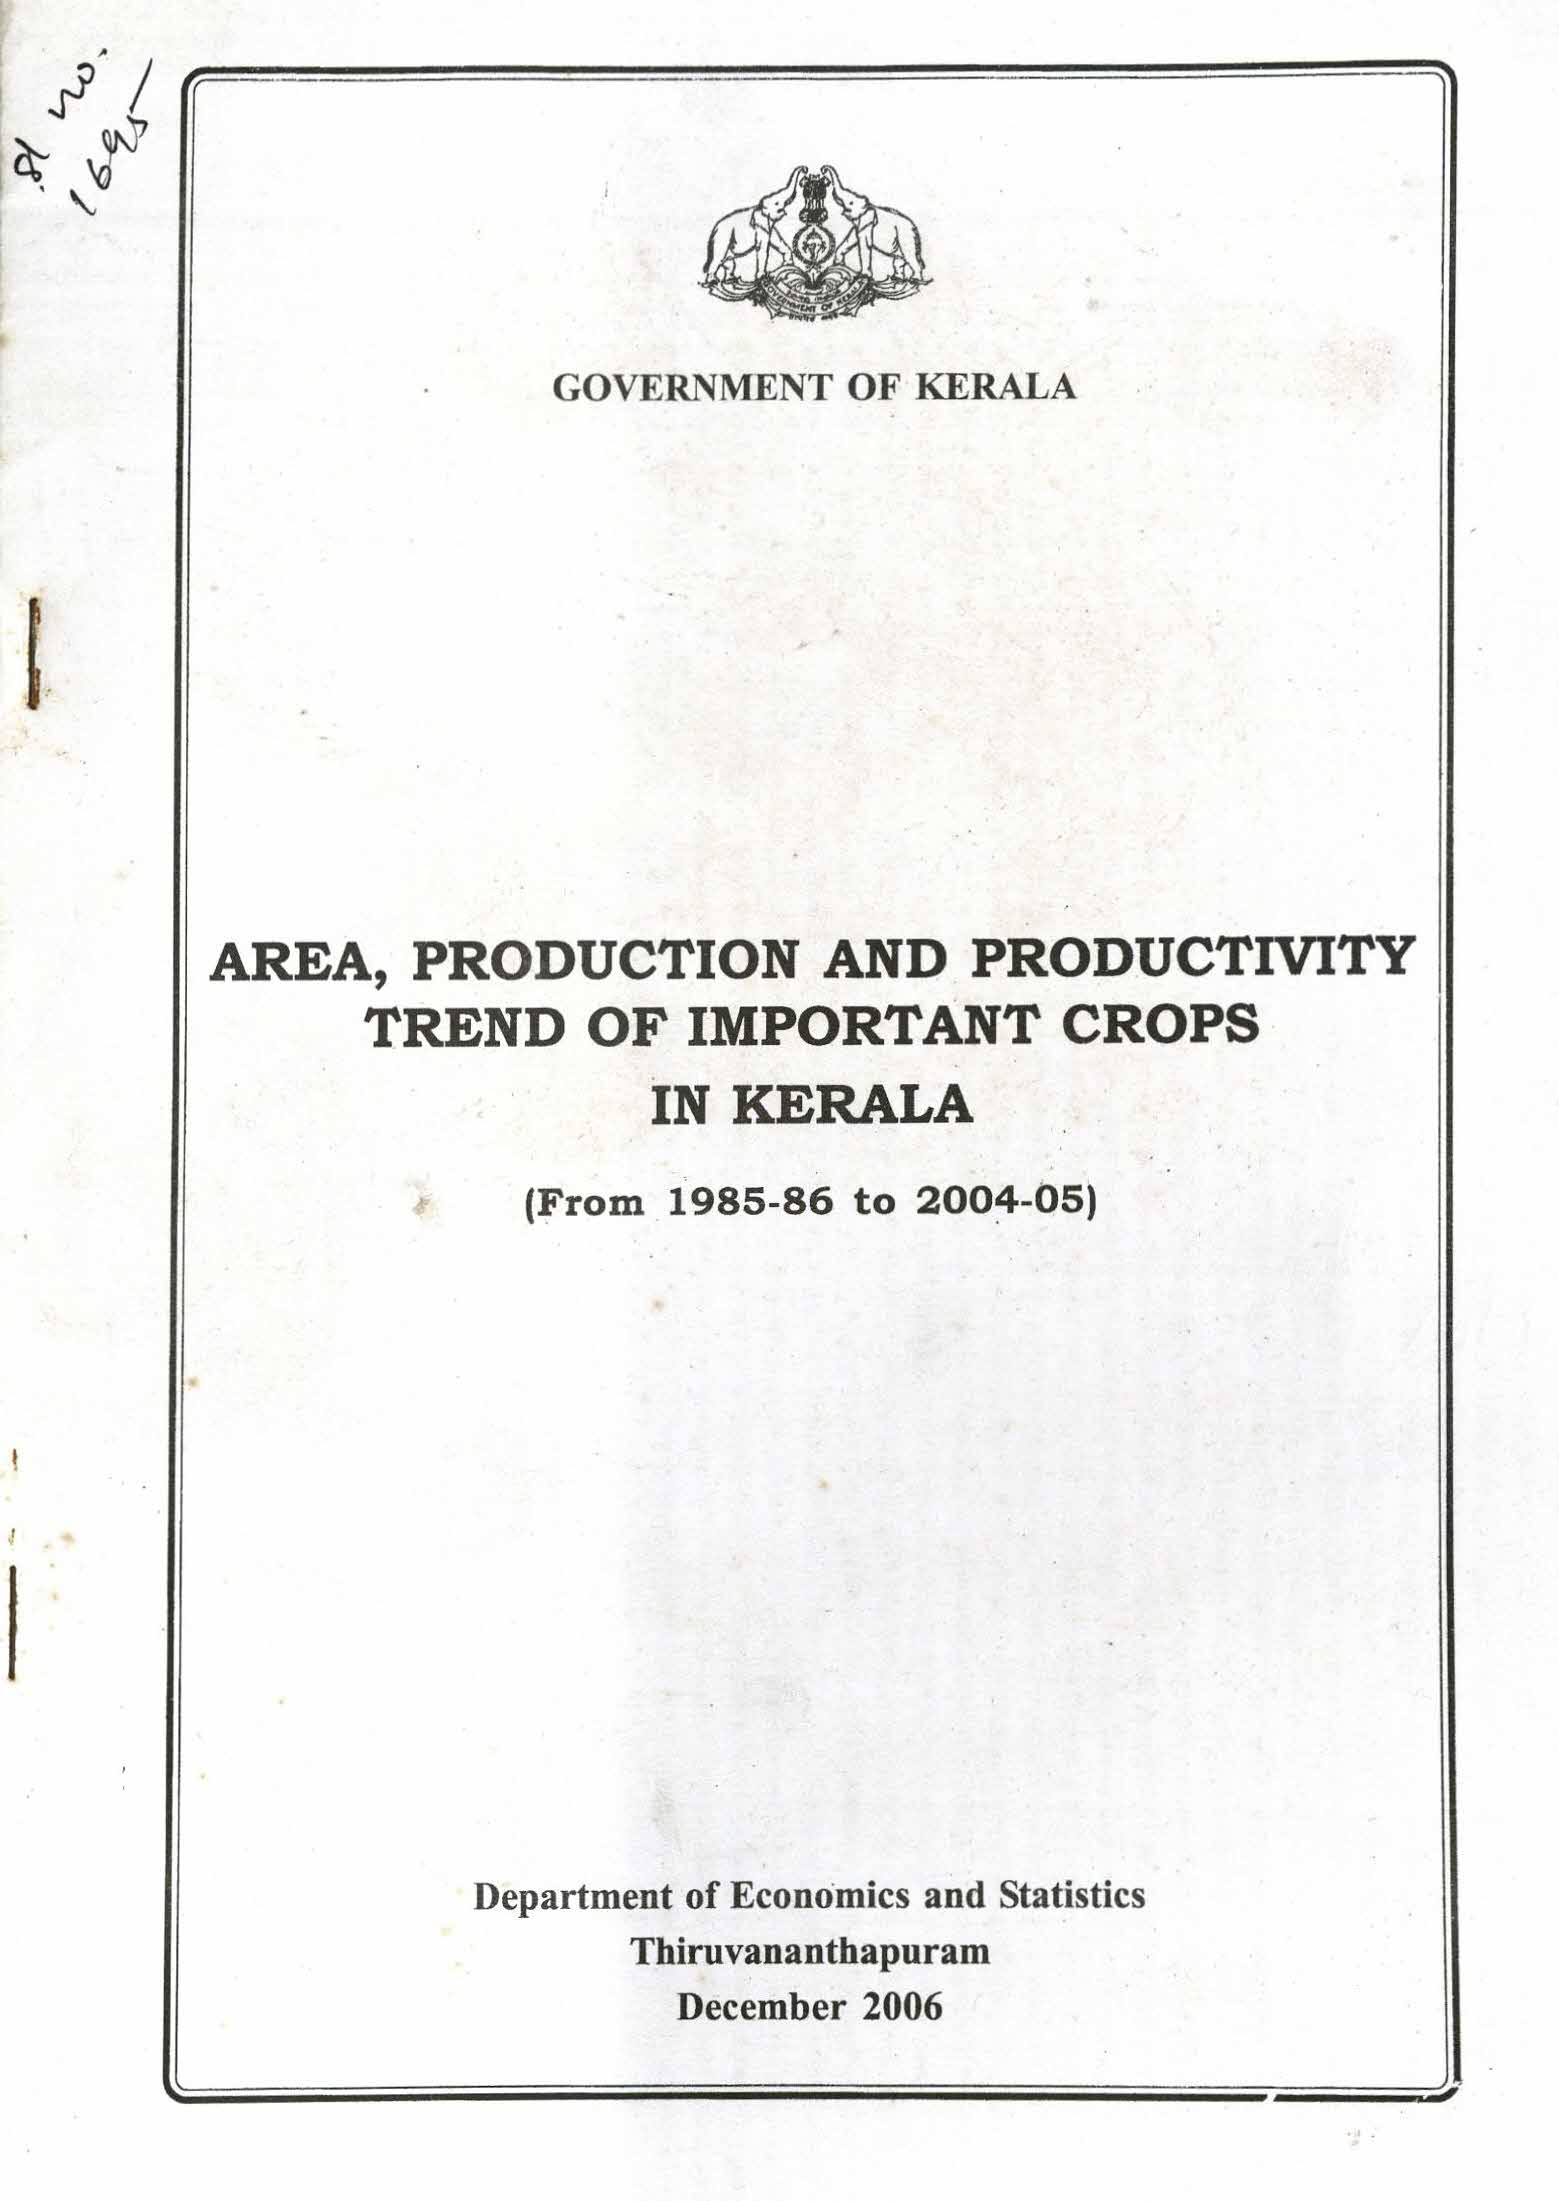 AREA PRODUTION AND PRODUCTIVITY TREND OF IMPORTANT CROPS IN KERALA FROM 1985-86 TO 2004-05